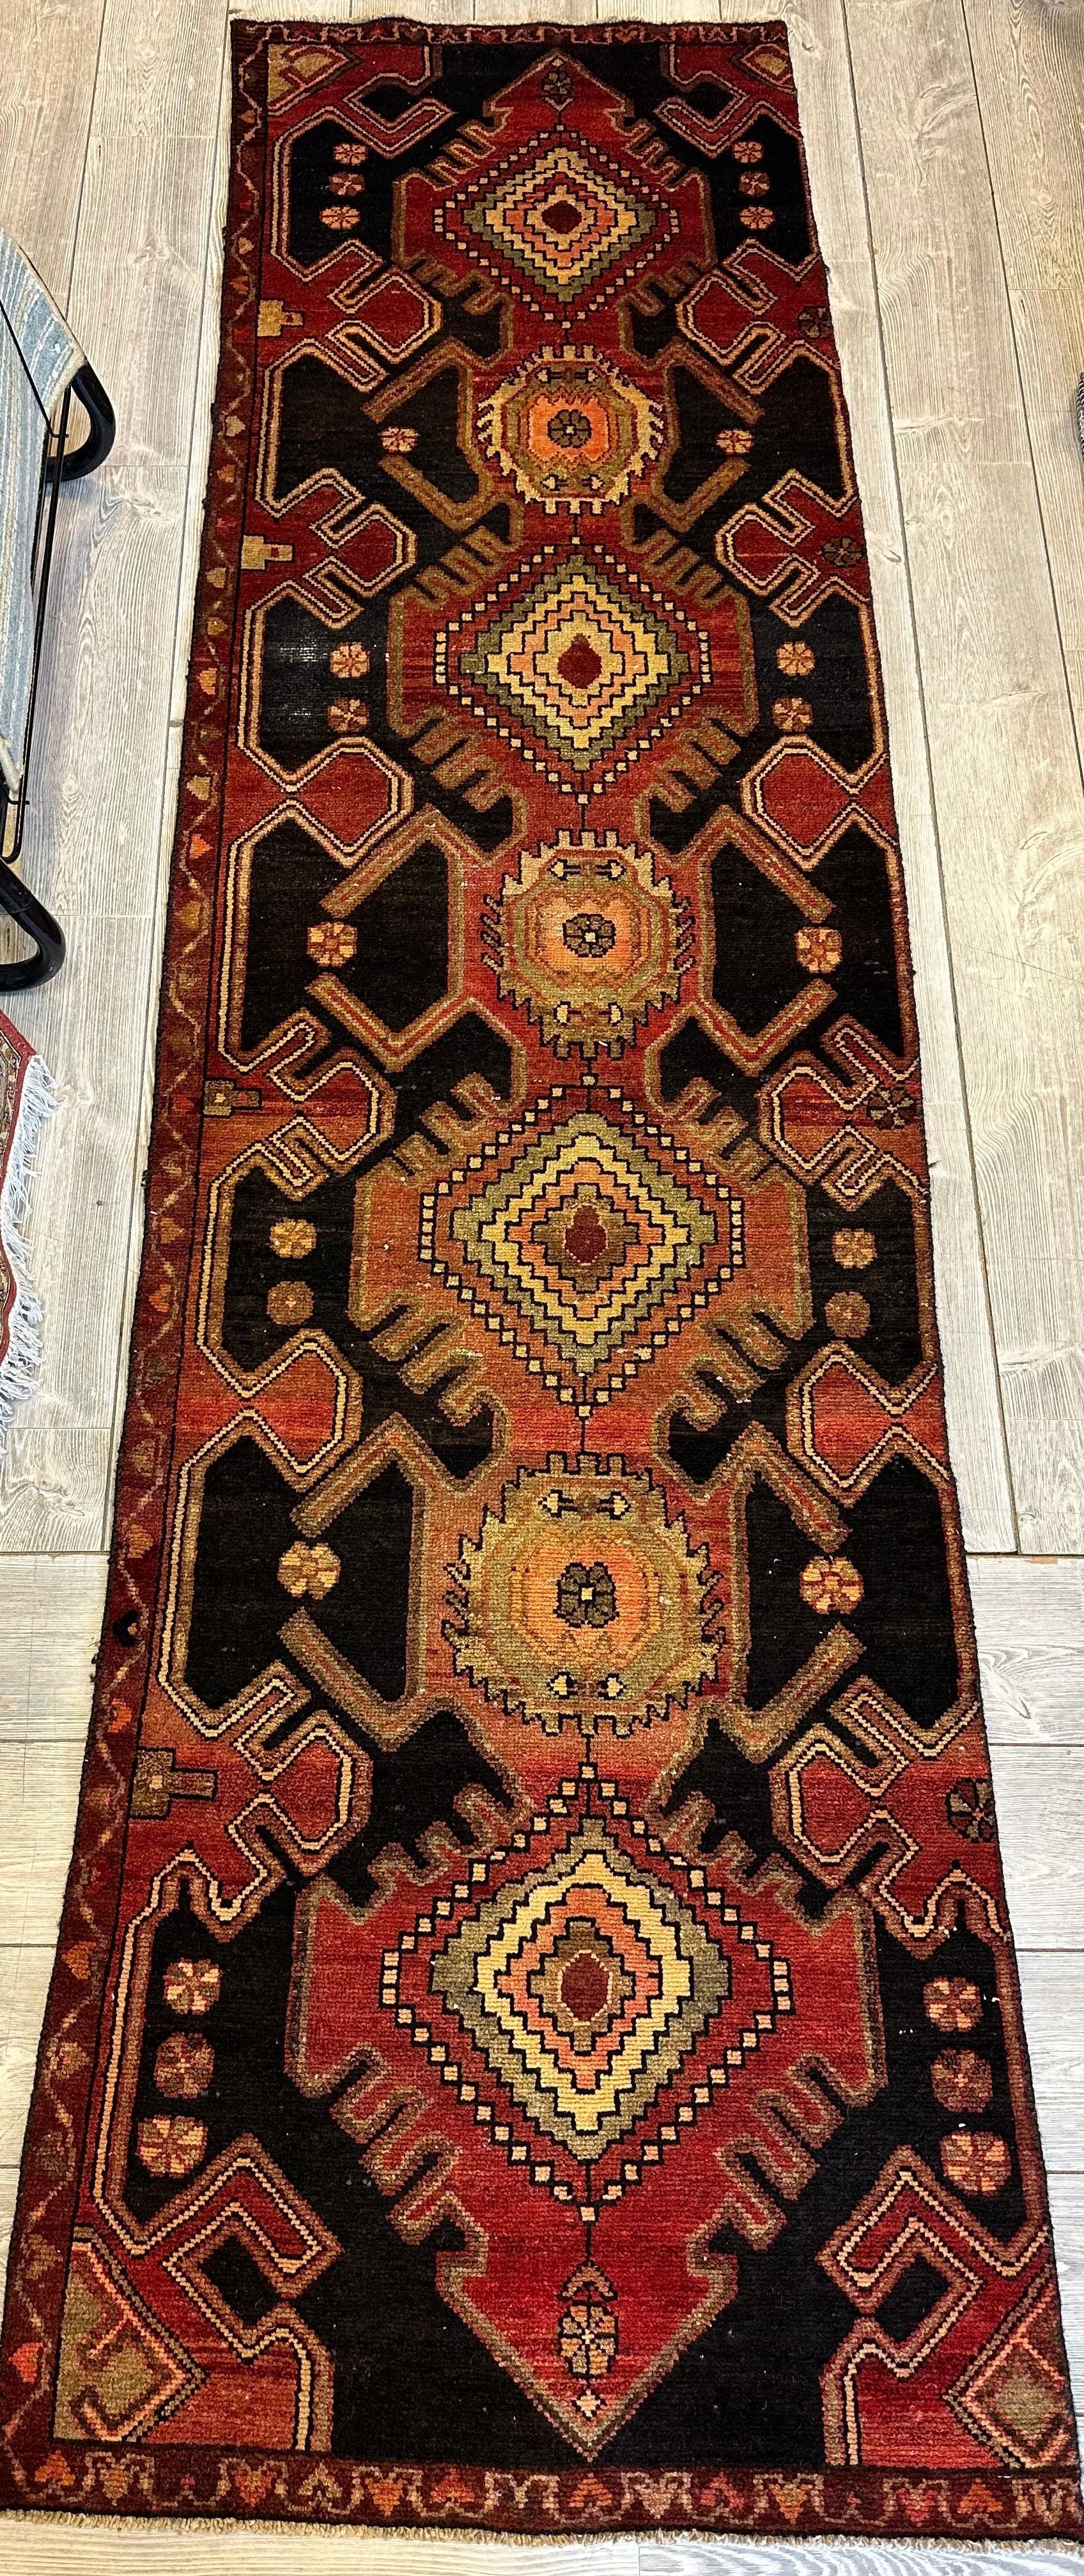 Hand-knotted Persian Tribal Runner Rug 2’6”x9’10”